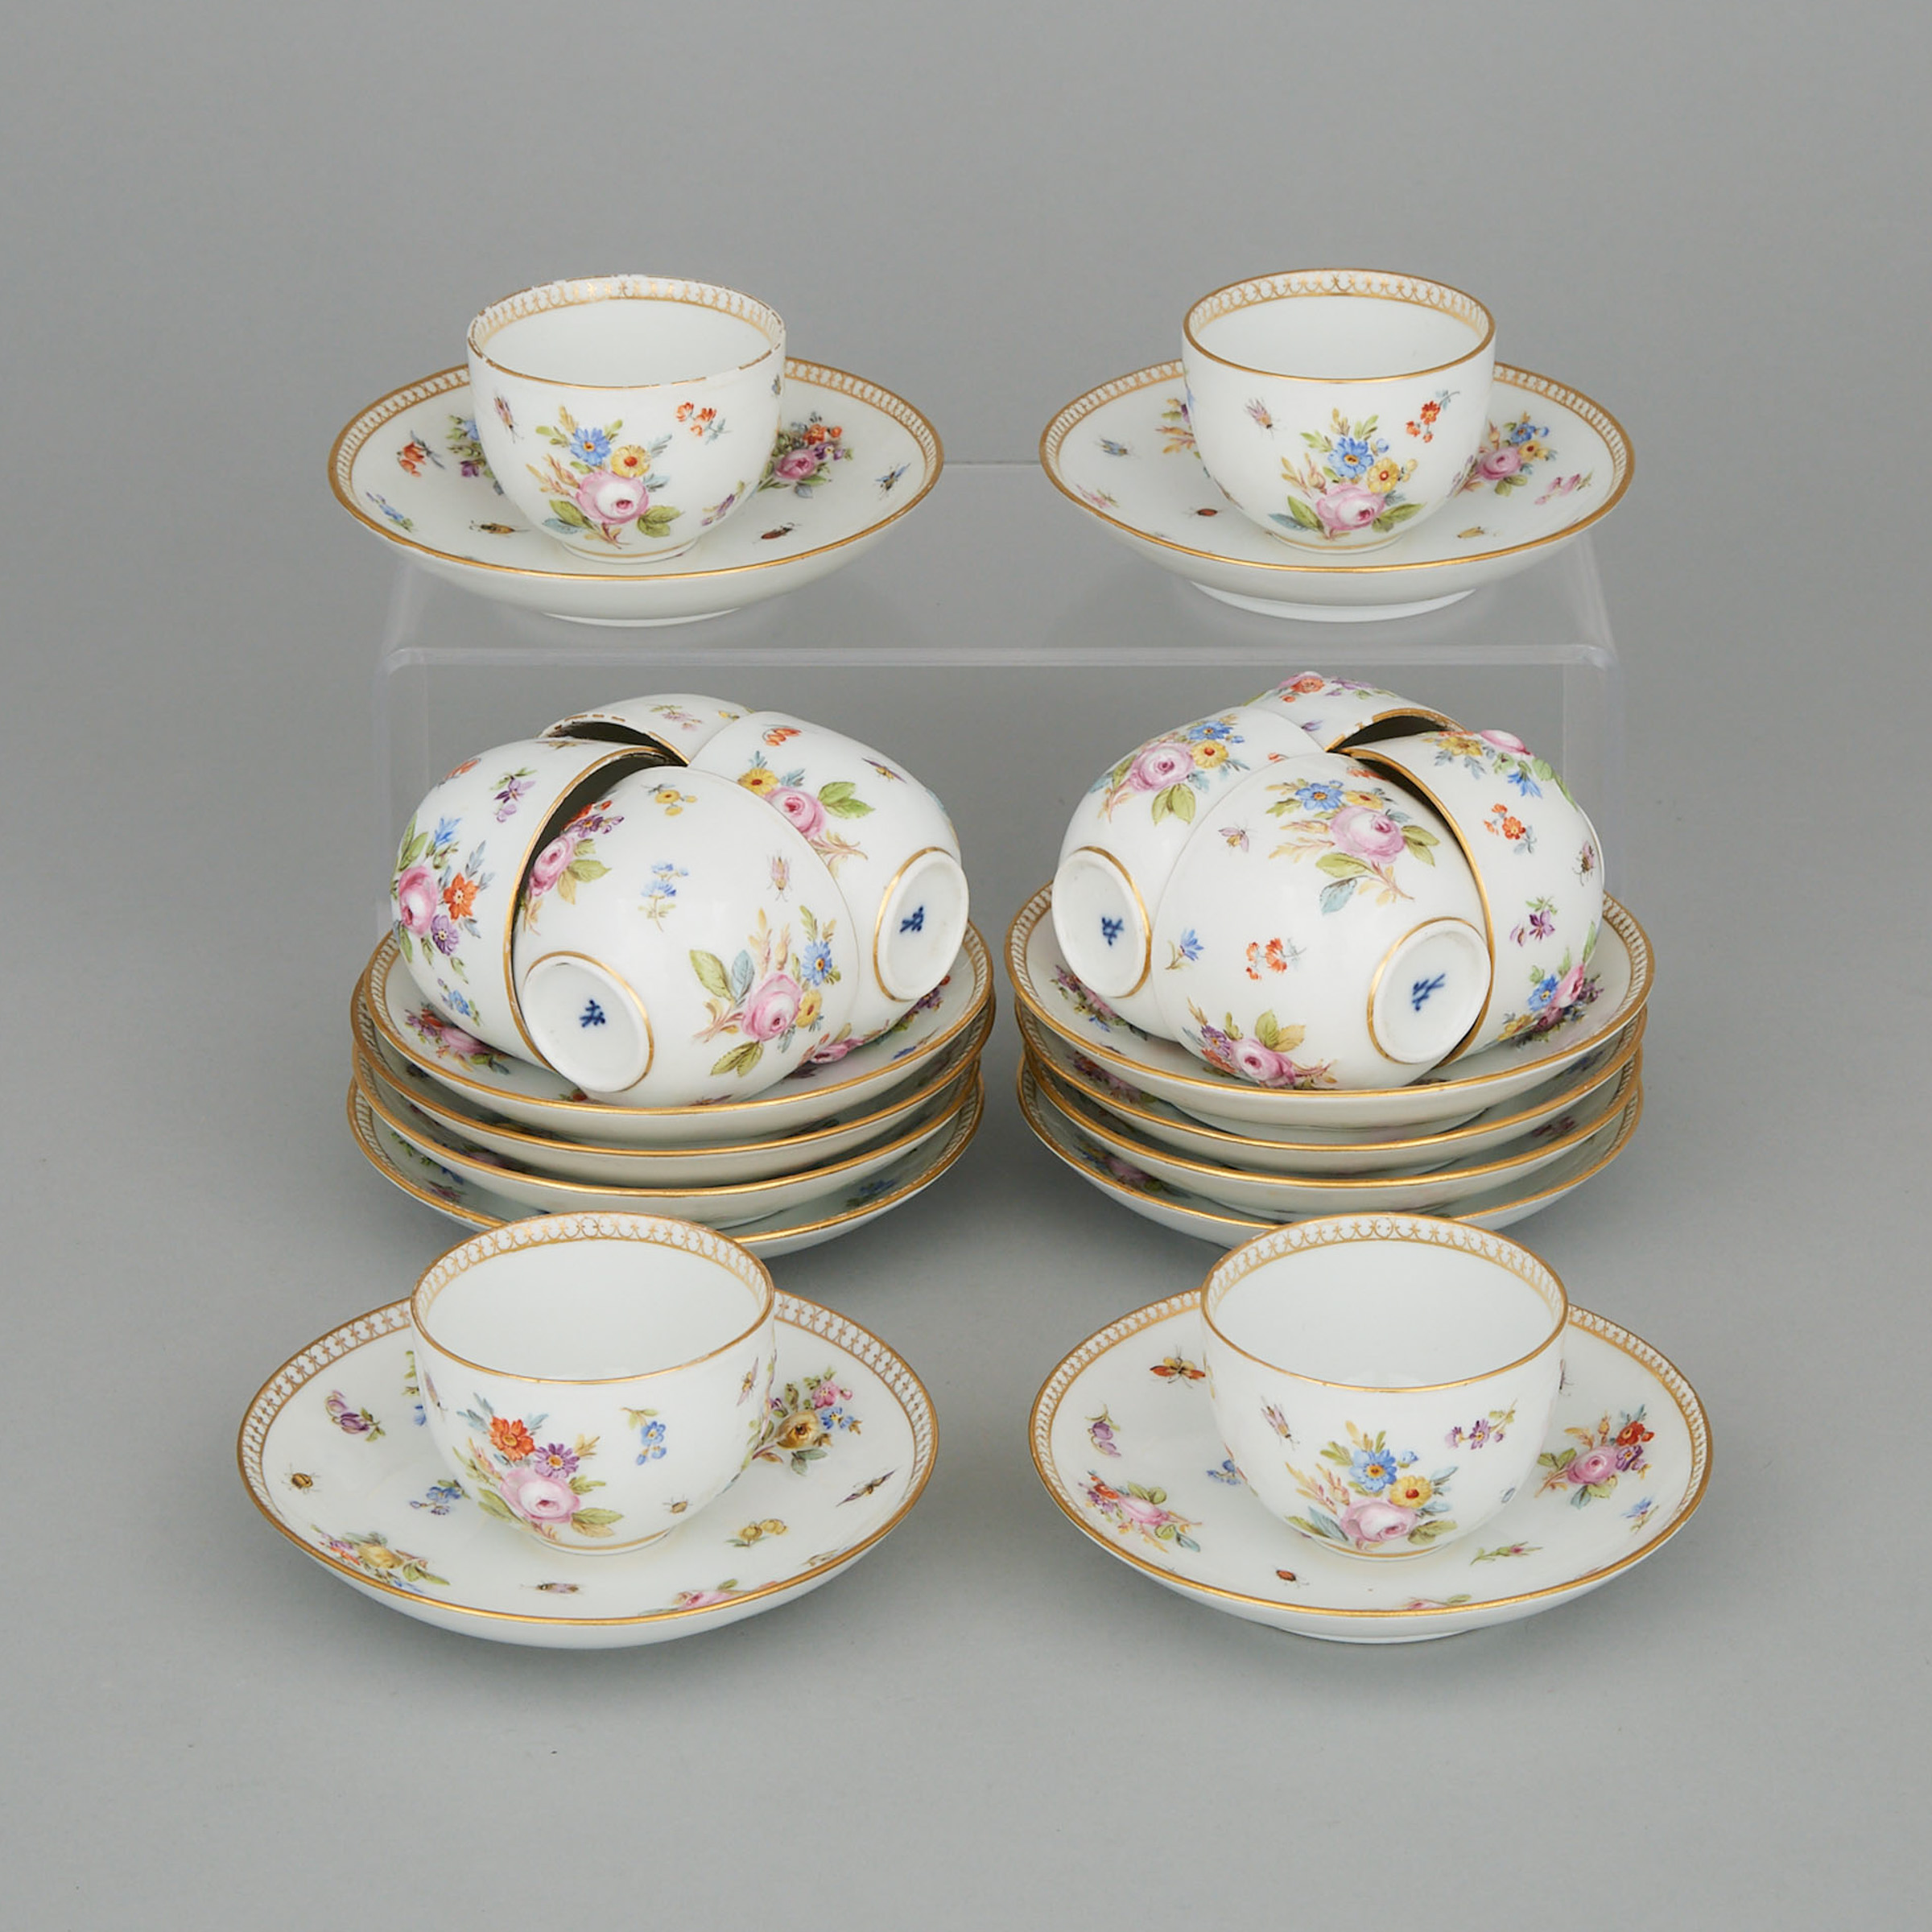 Twelve Meissen Moulded Floral Cups and Saucers, early 20th century